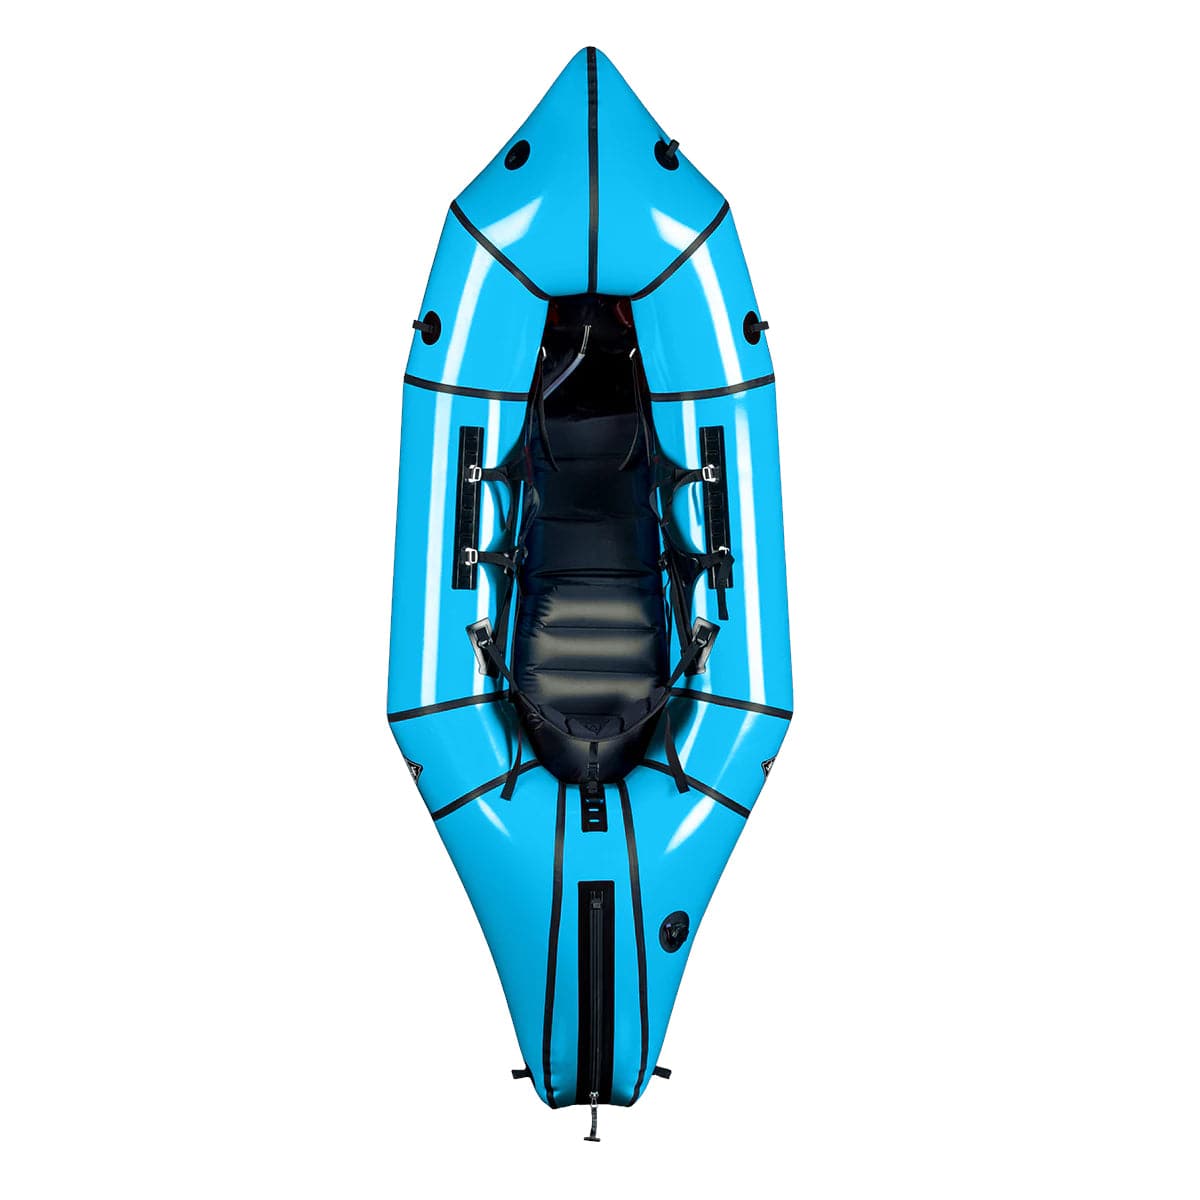 Featuring the Gnarwhal Self-Bailer pack raft manufactured by Alpacka shown here from a second angle.